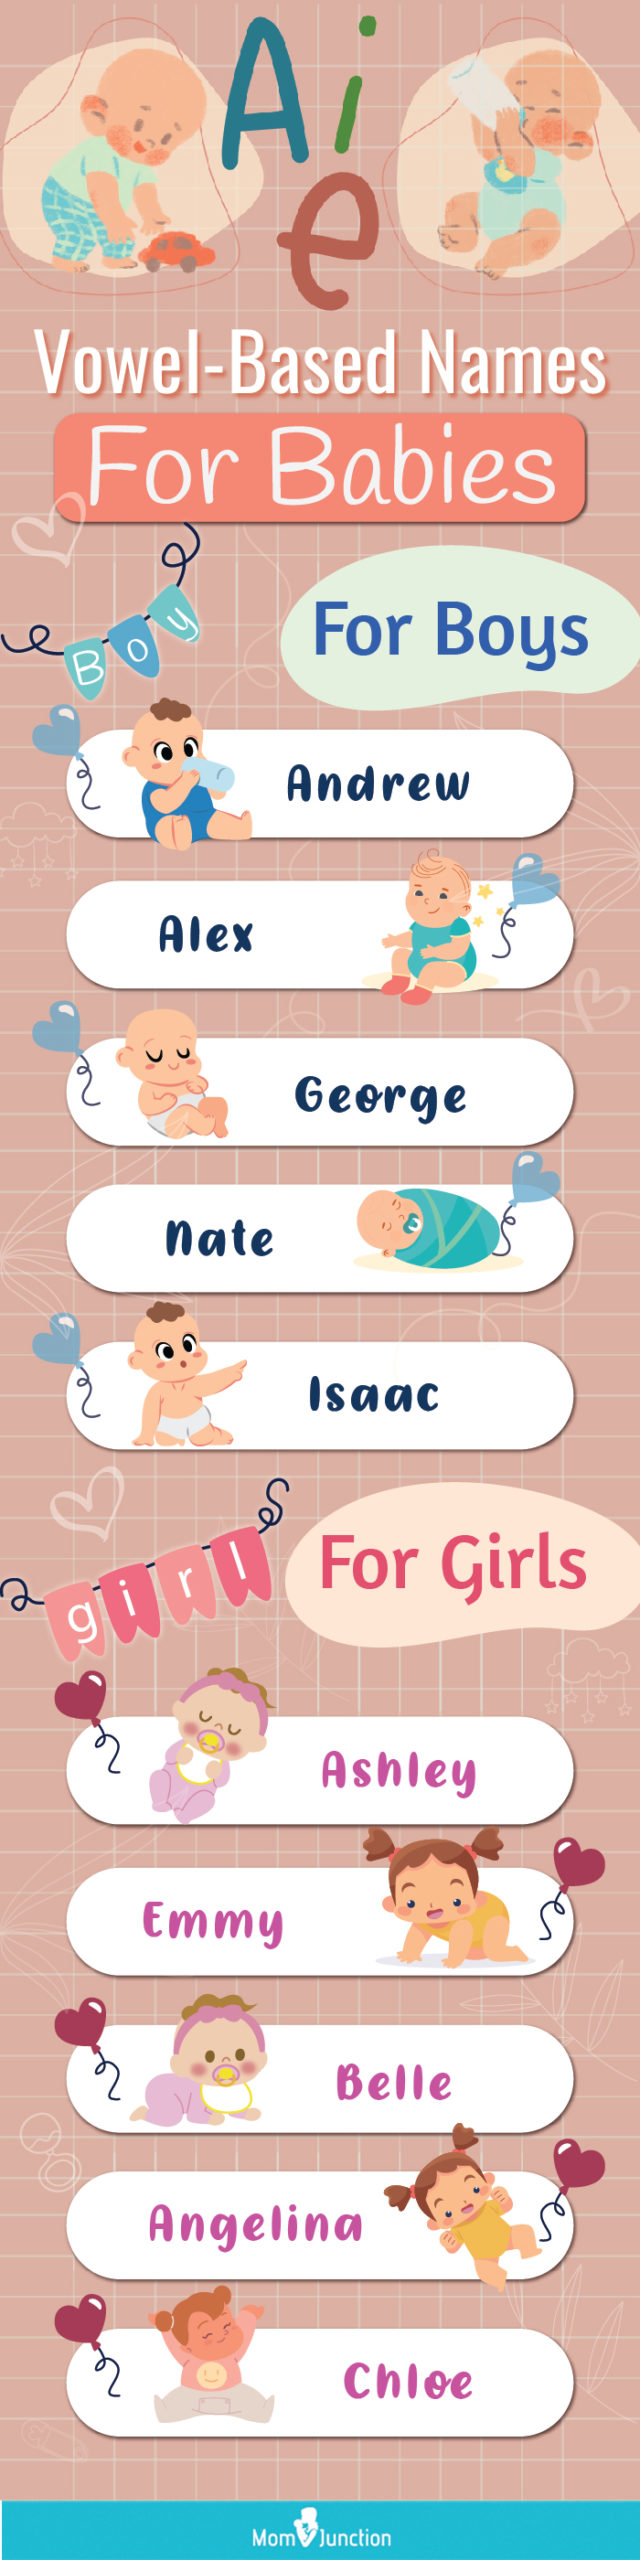 vowel baby names for boys and girls (infographic)